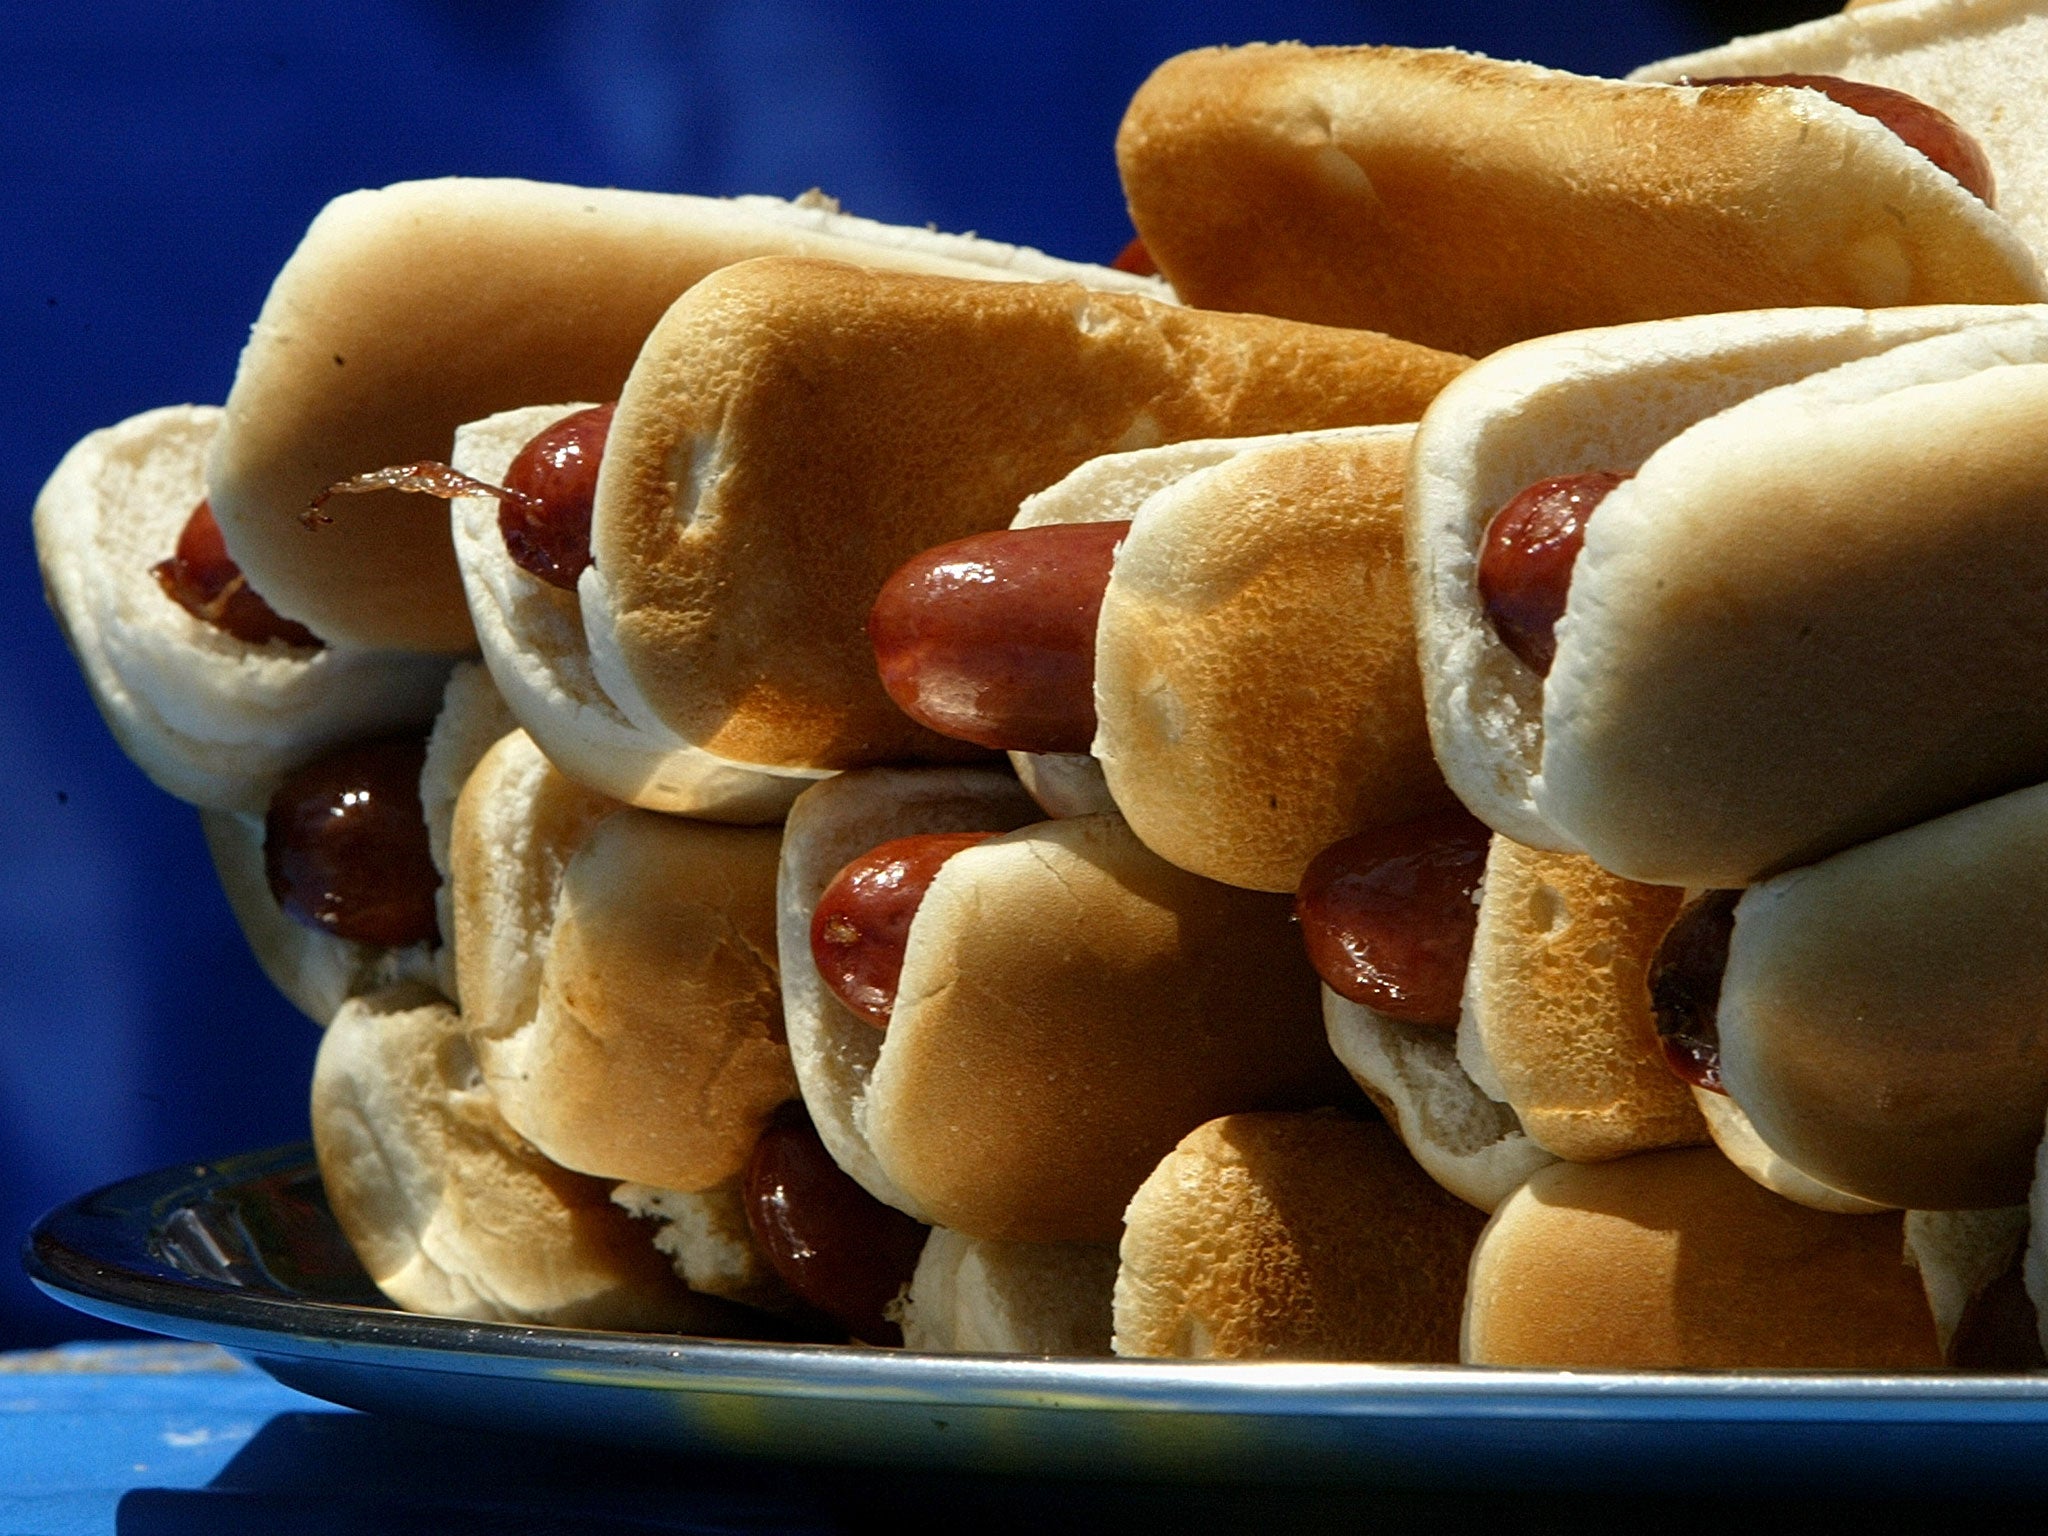 The National Hot Dog and Sandwich Council have defiantly claimed that a hot dog is not a sandwich